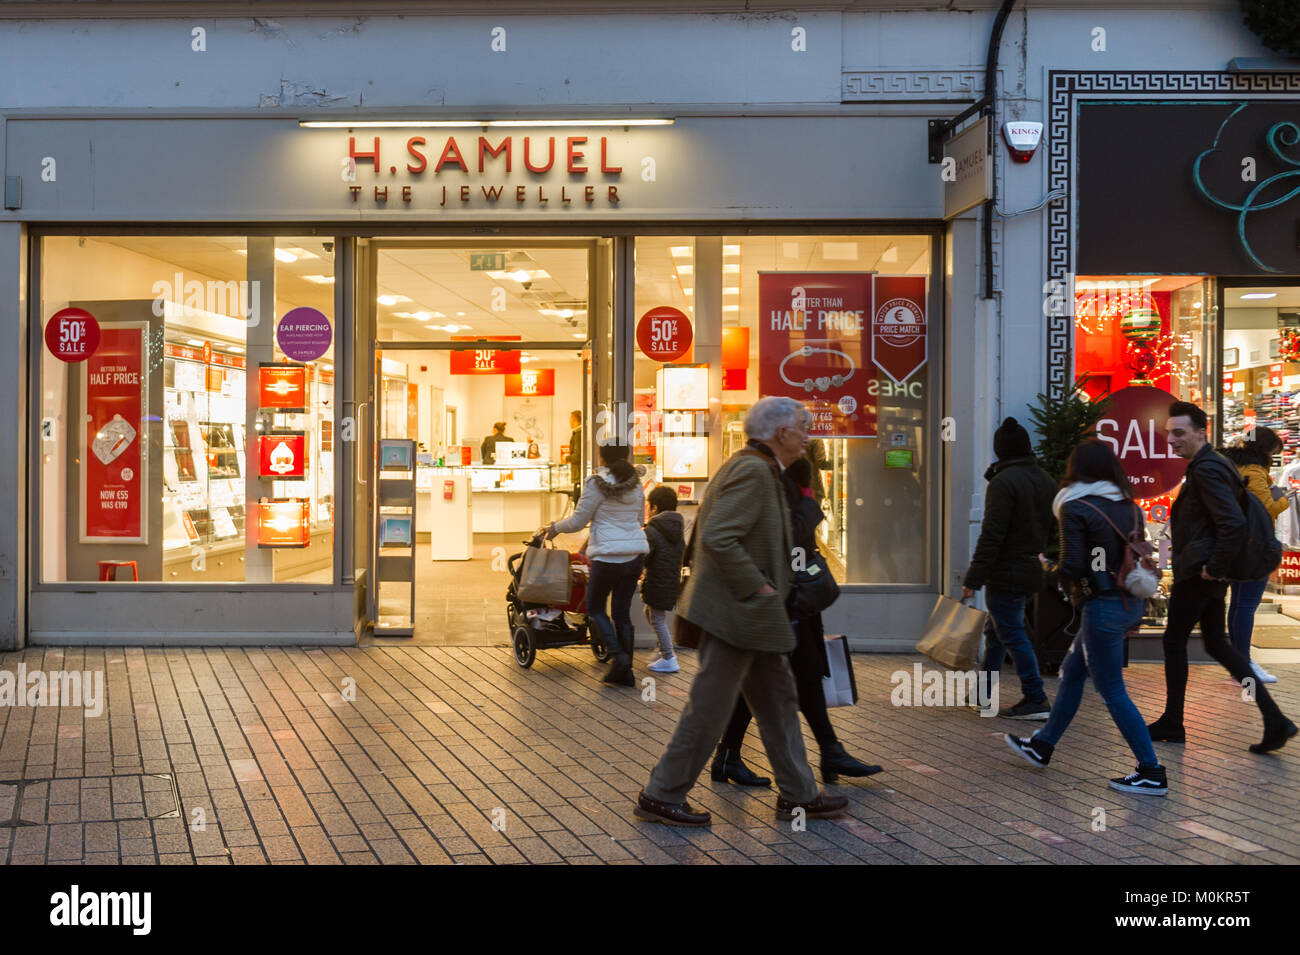 H. Samuel Jewellers shop on Patrick Street, Cork, Ireland with shoppers at dusk in the January sales. Stock Photo